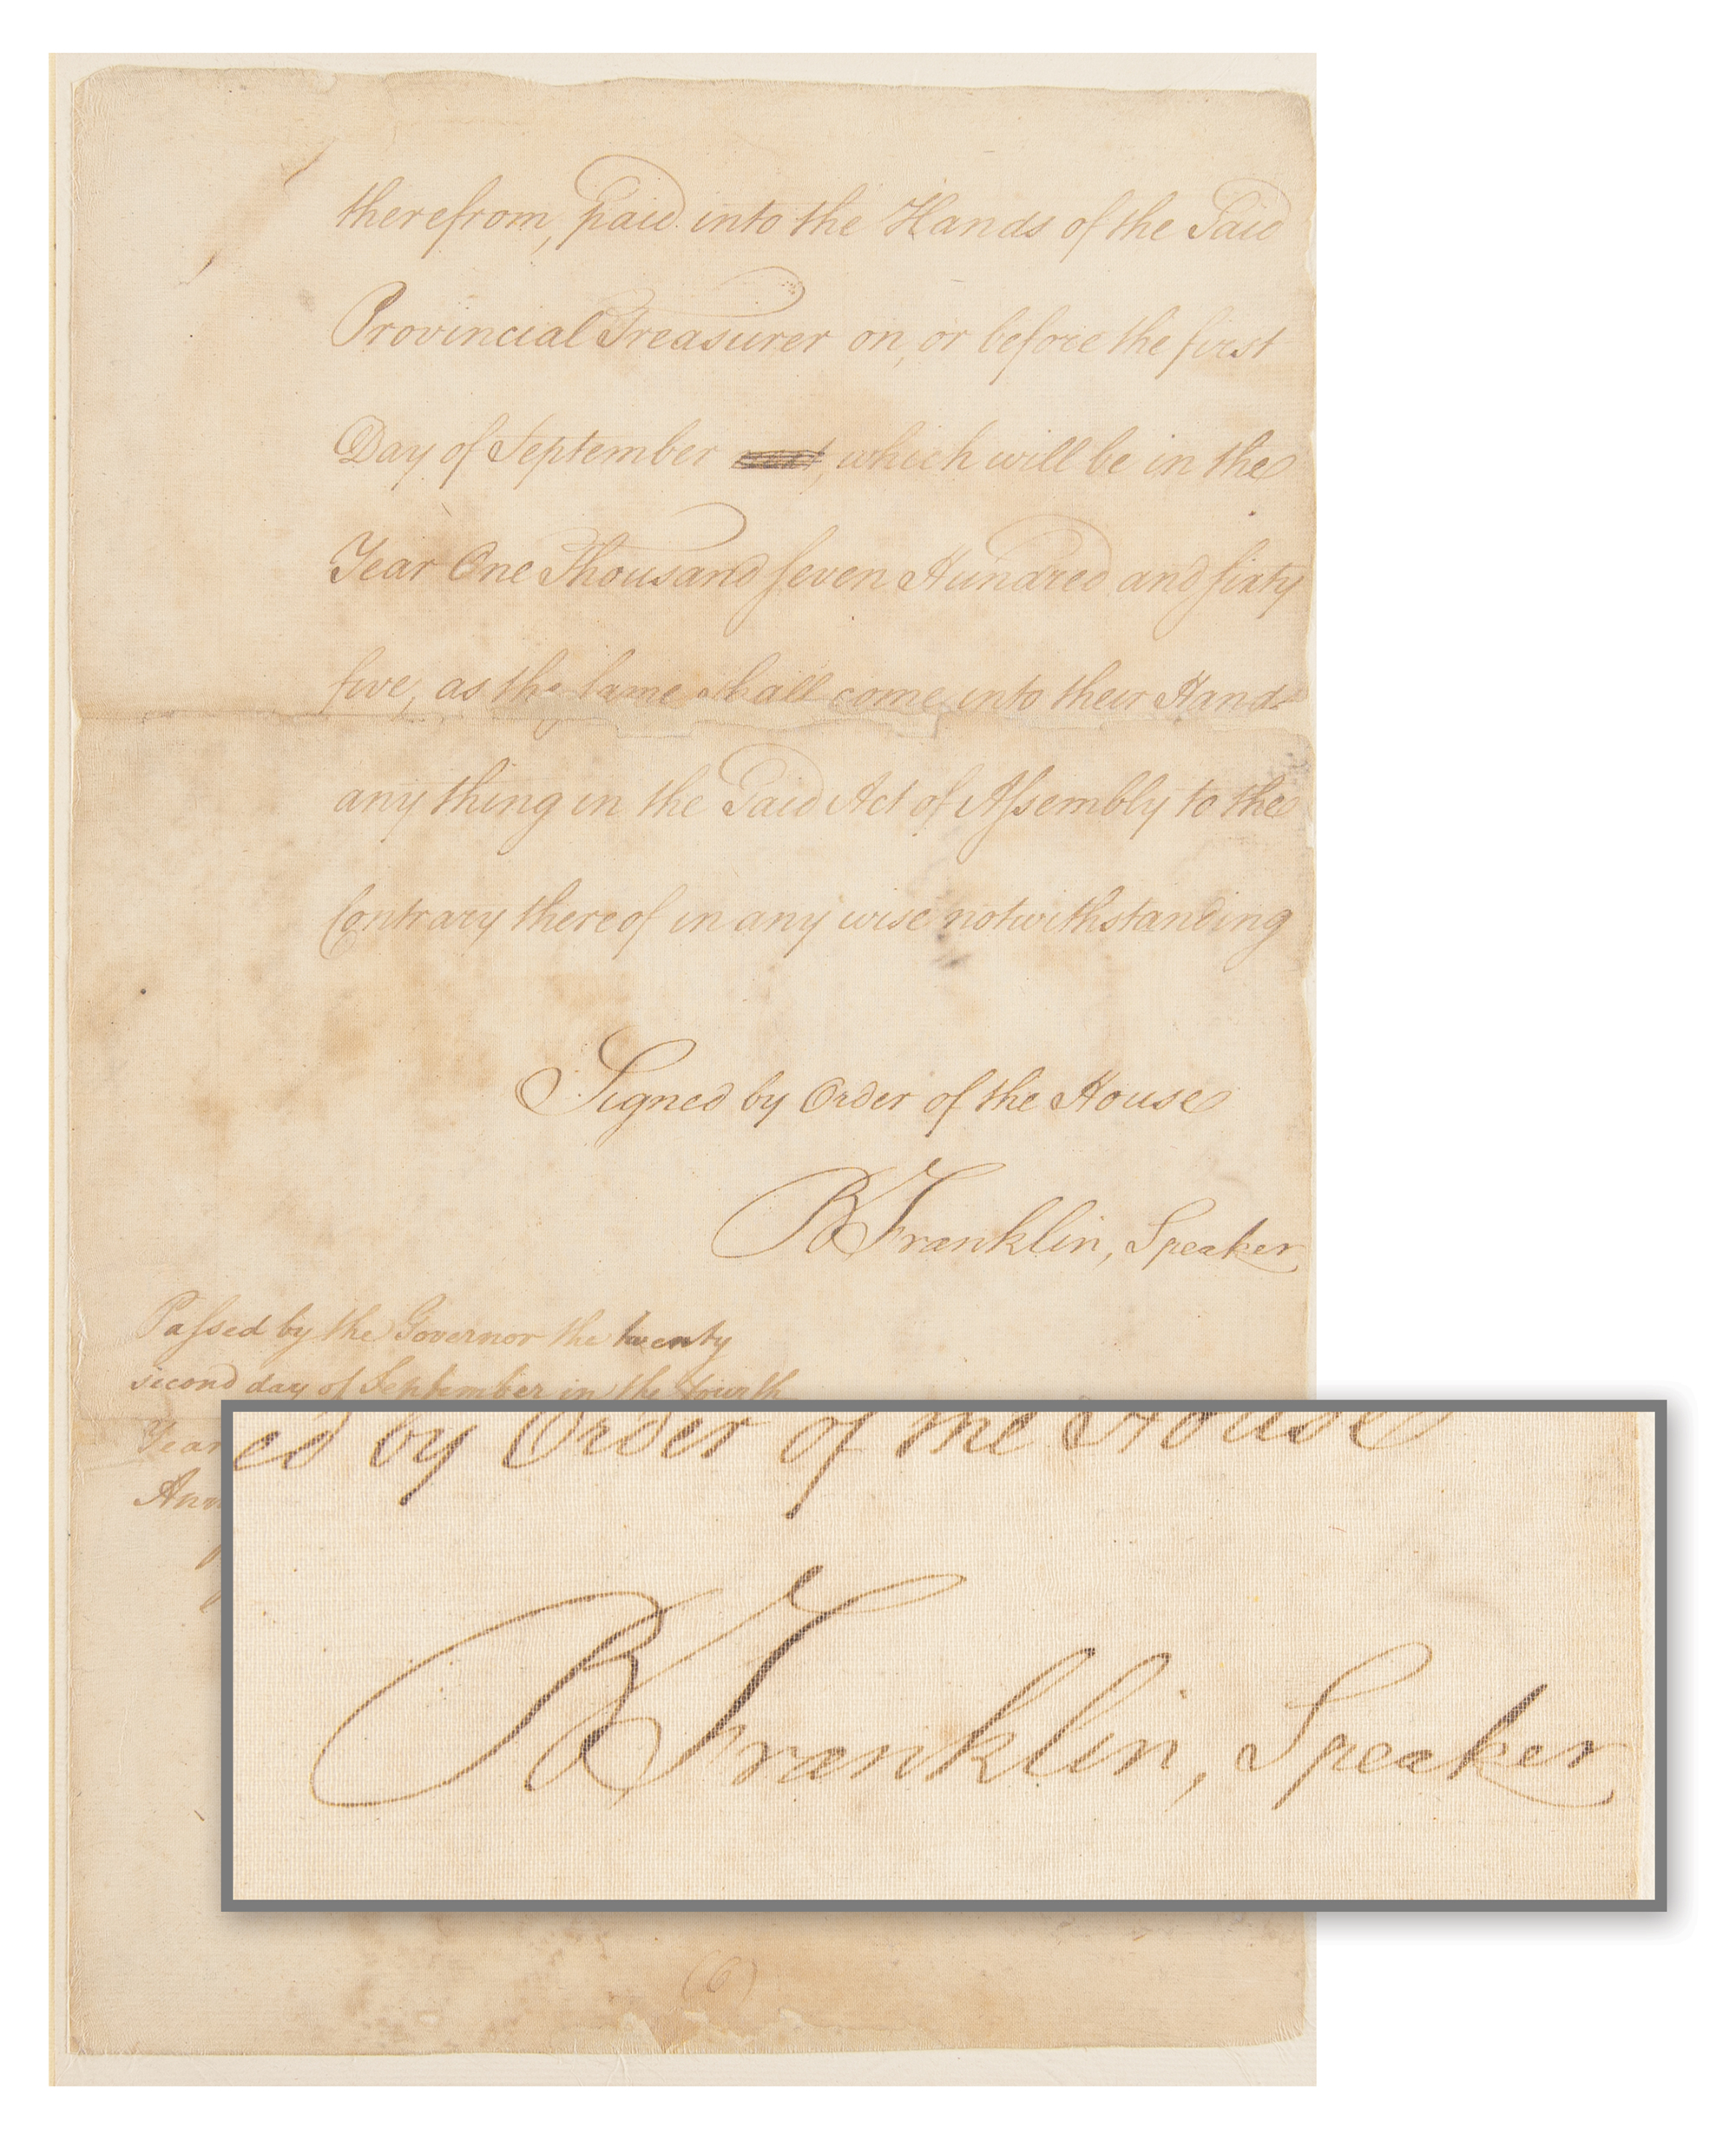 Lot #57 Benjamin Franklin Document Signed (1764) - Approving Funds for the Commissioners for Indian Affairs